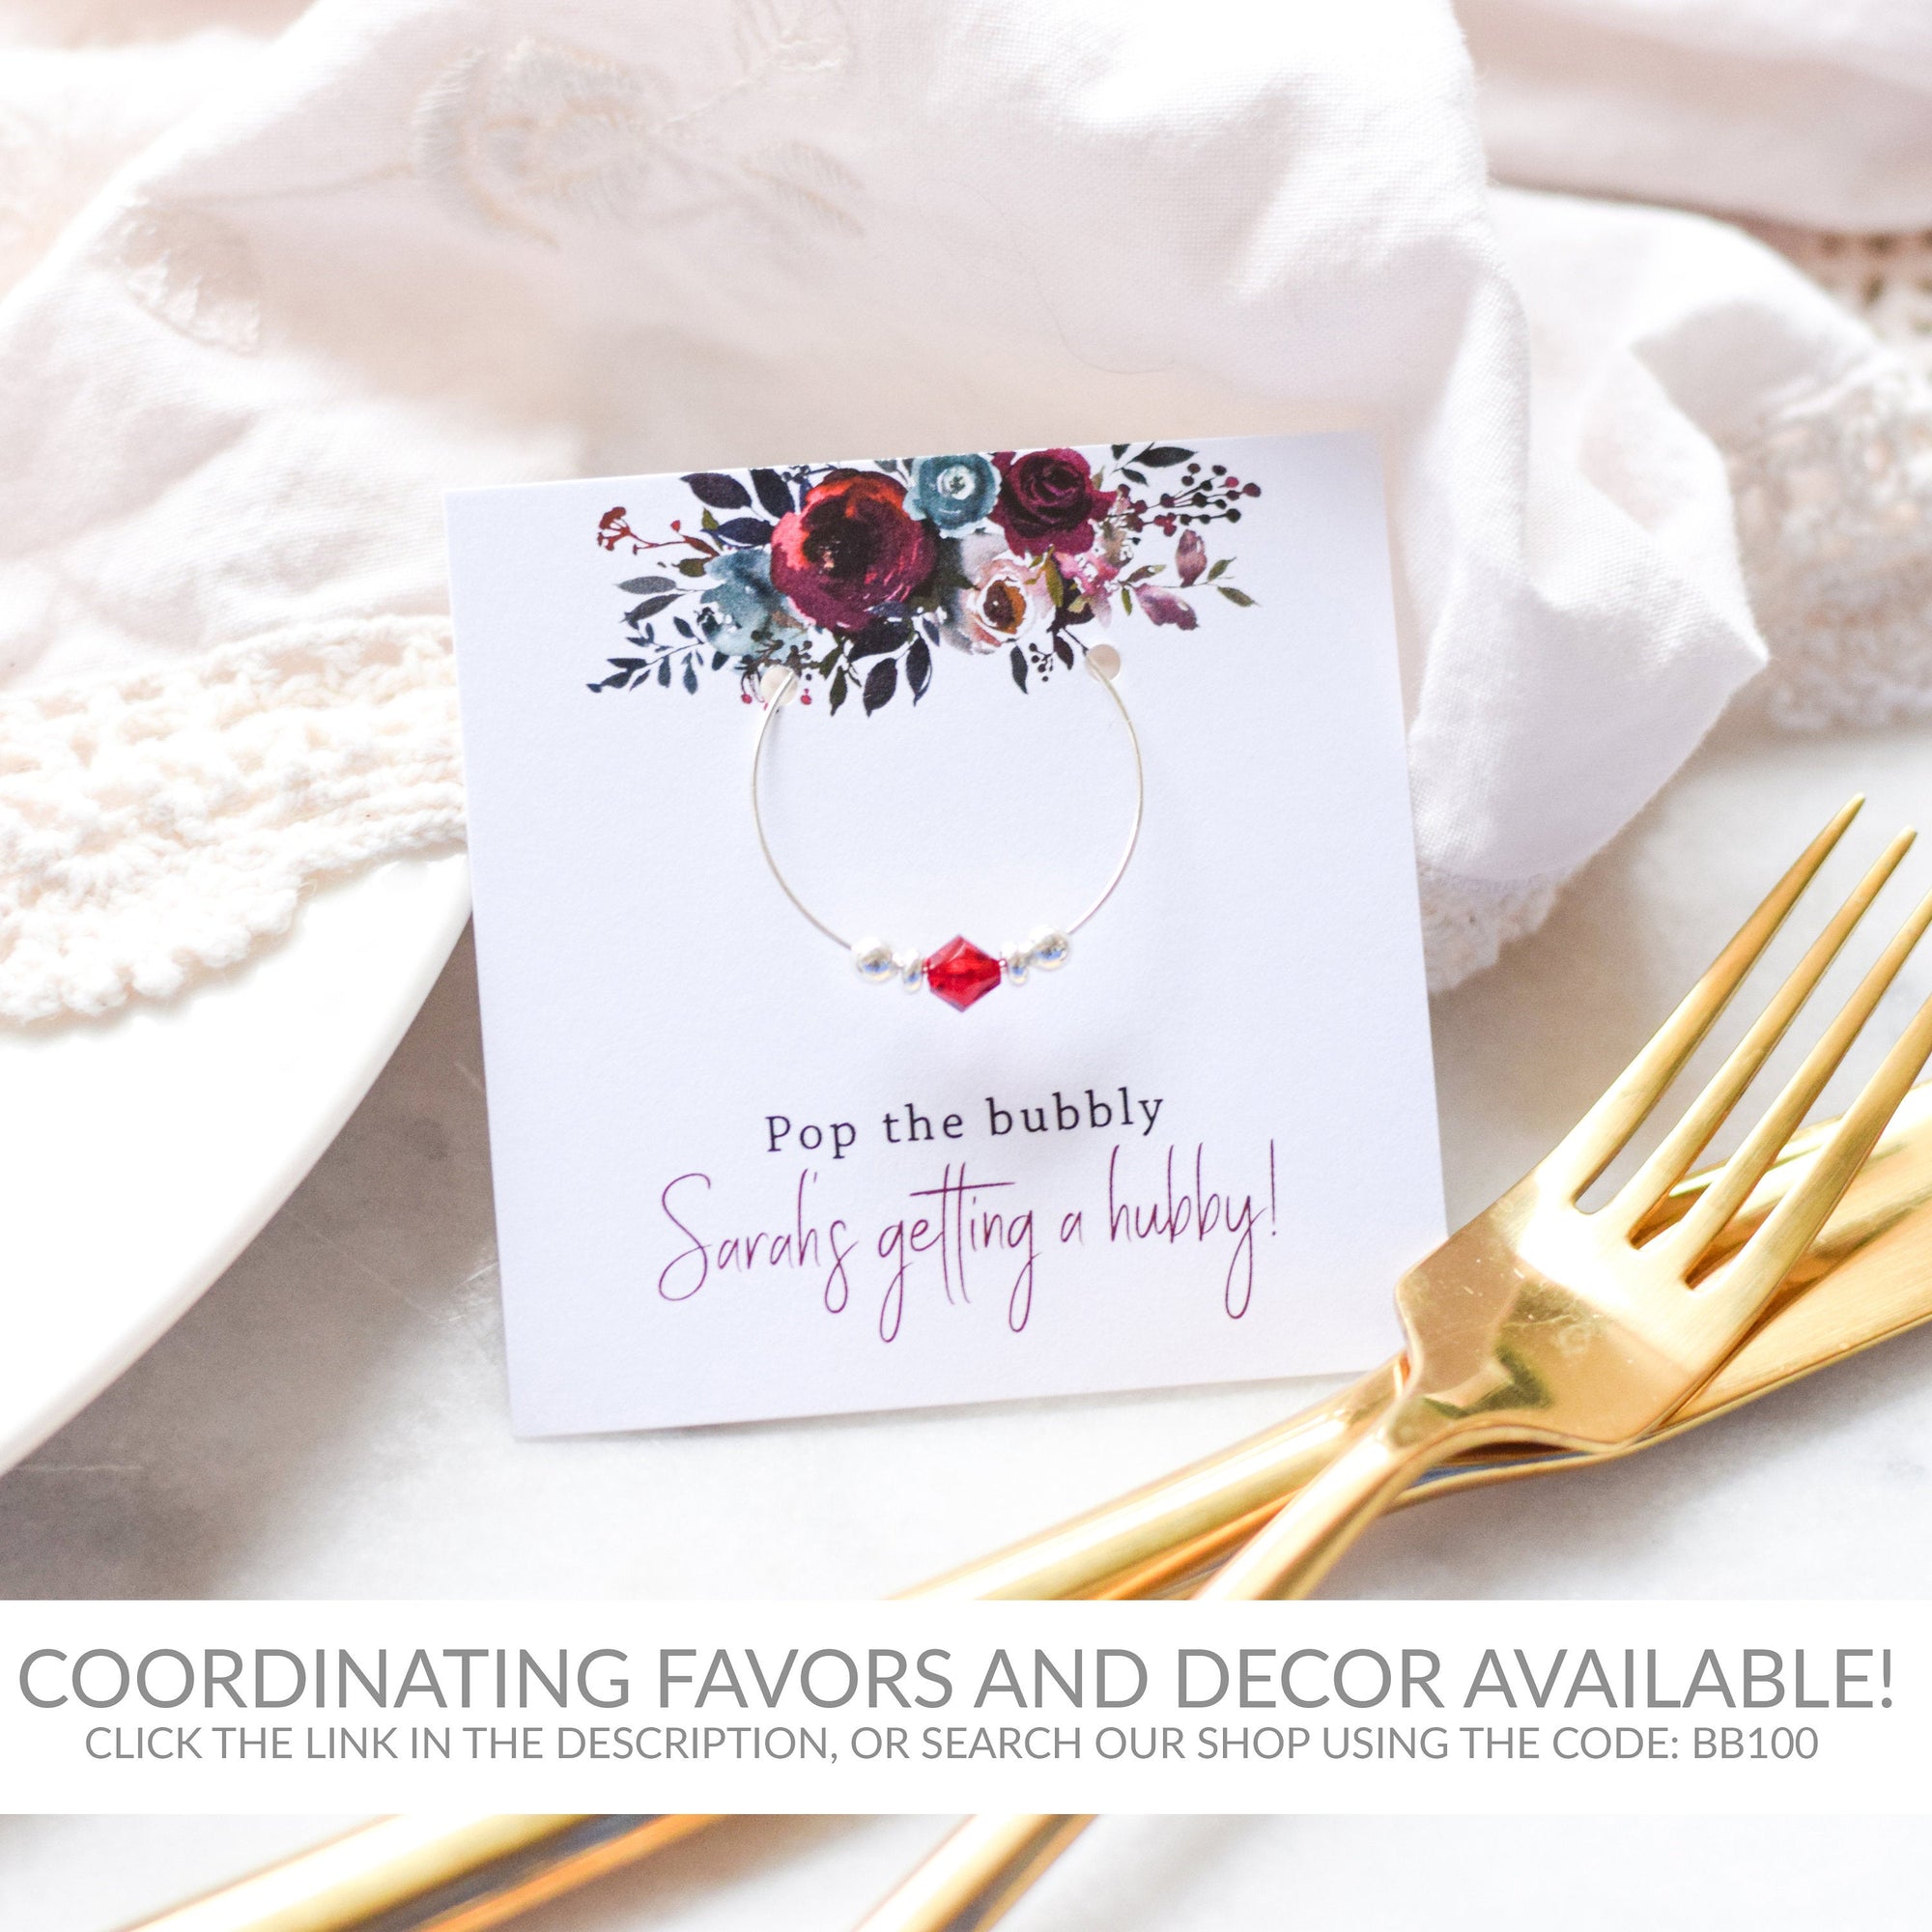 Burgundy and Navy Wedding Place Card Template, Personalized Wedding Name Cards, Printable Place Cards, DIGITAL DOWNLOAD - BB100 - @PlumPolkaDot 